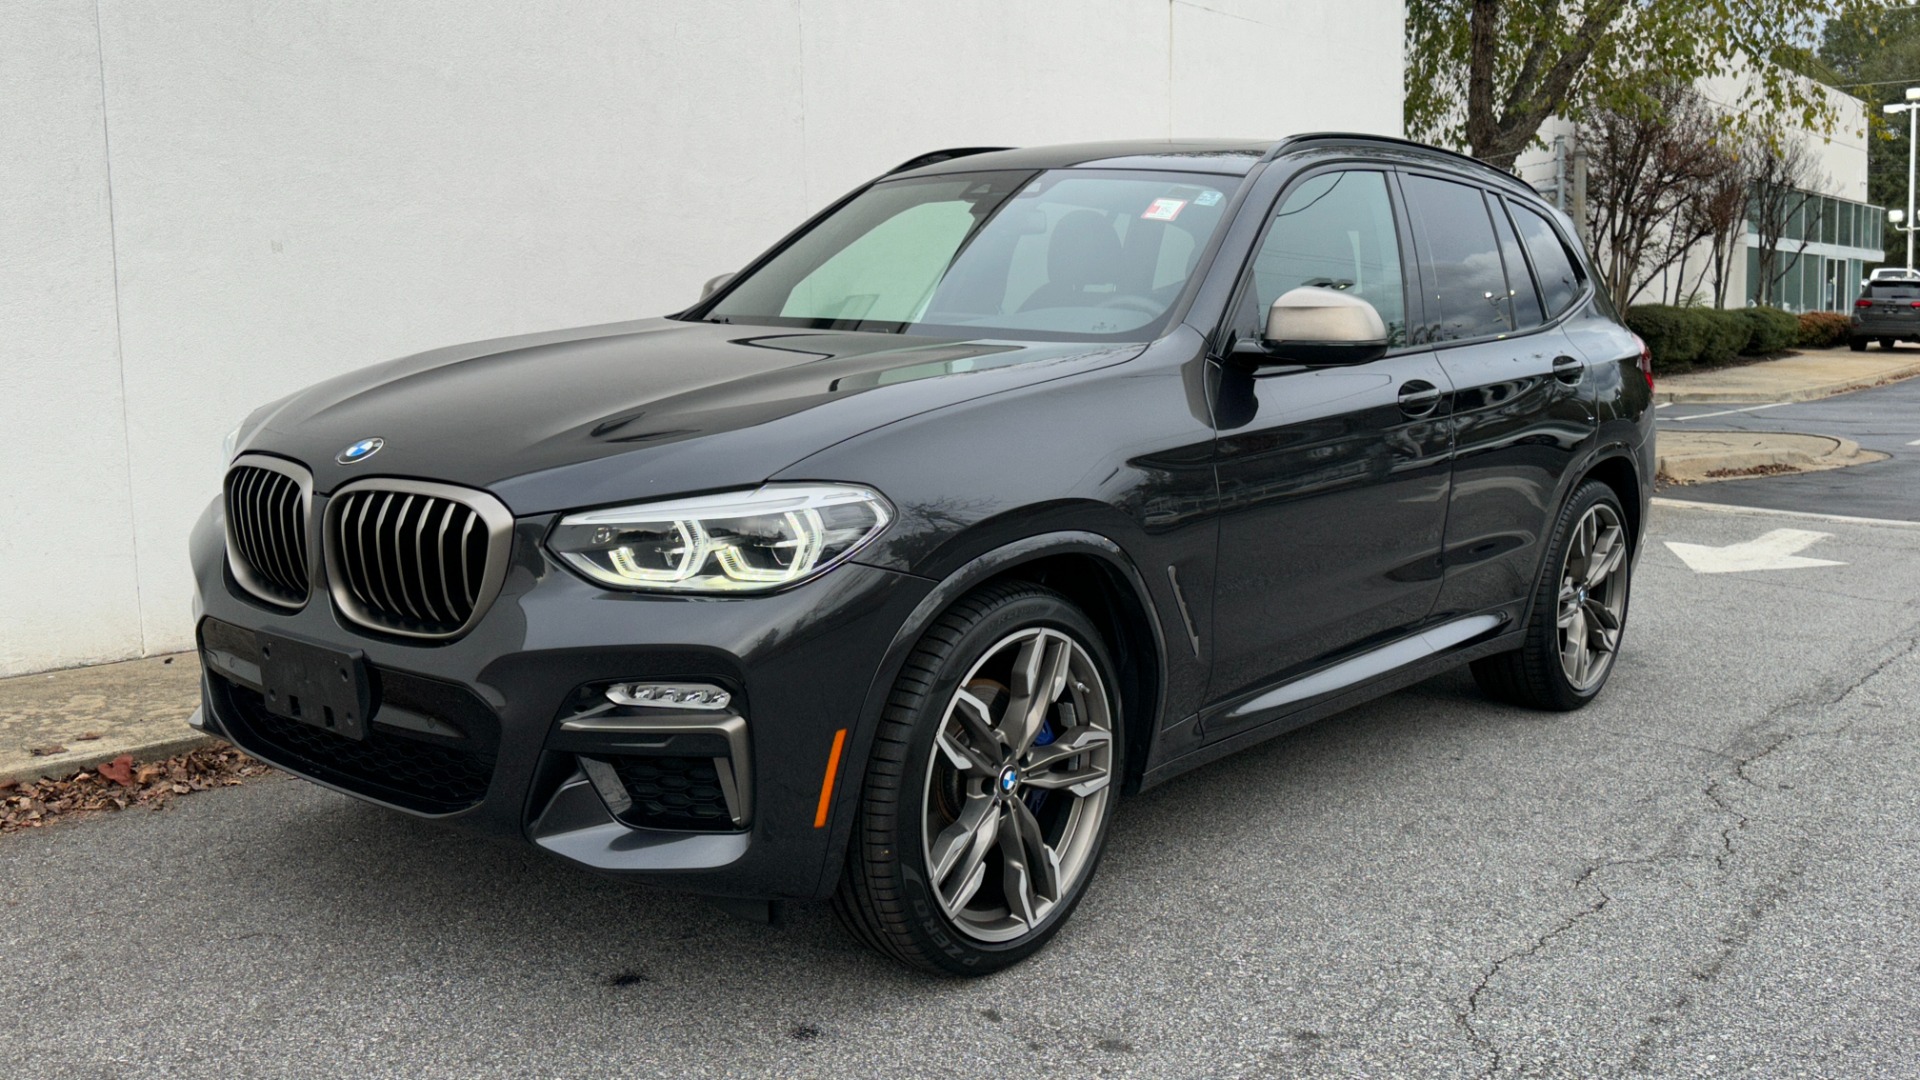 Used 2019 BMW X3 M40i / 21IN WHEELS / HEATED SEATS / NAVIGATION / HEATED STEERING for sale Sold at Formula Imports in Charlotte NC 28227 5